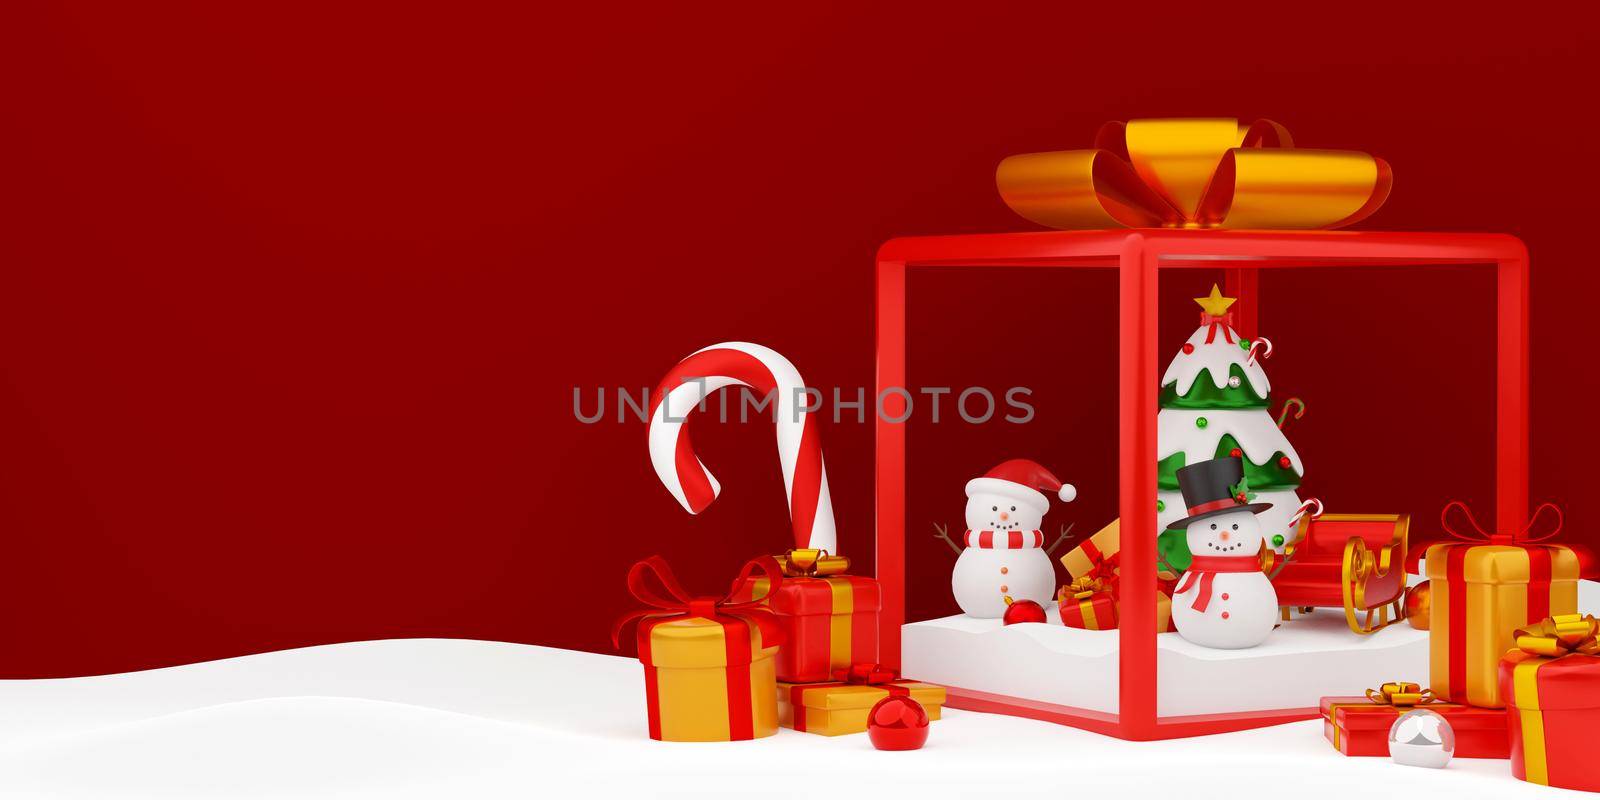 Snowman and Christmas tree within gift box, 3d illustration by nutzchotwarut